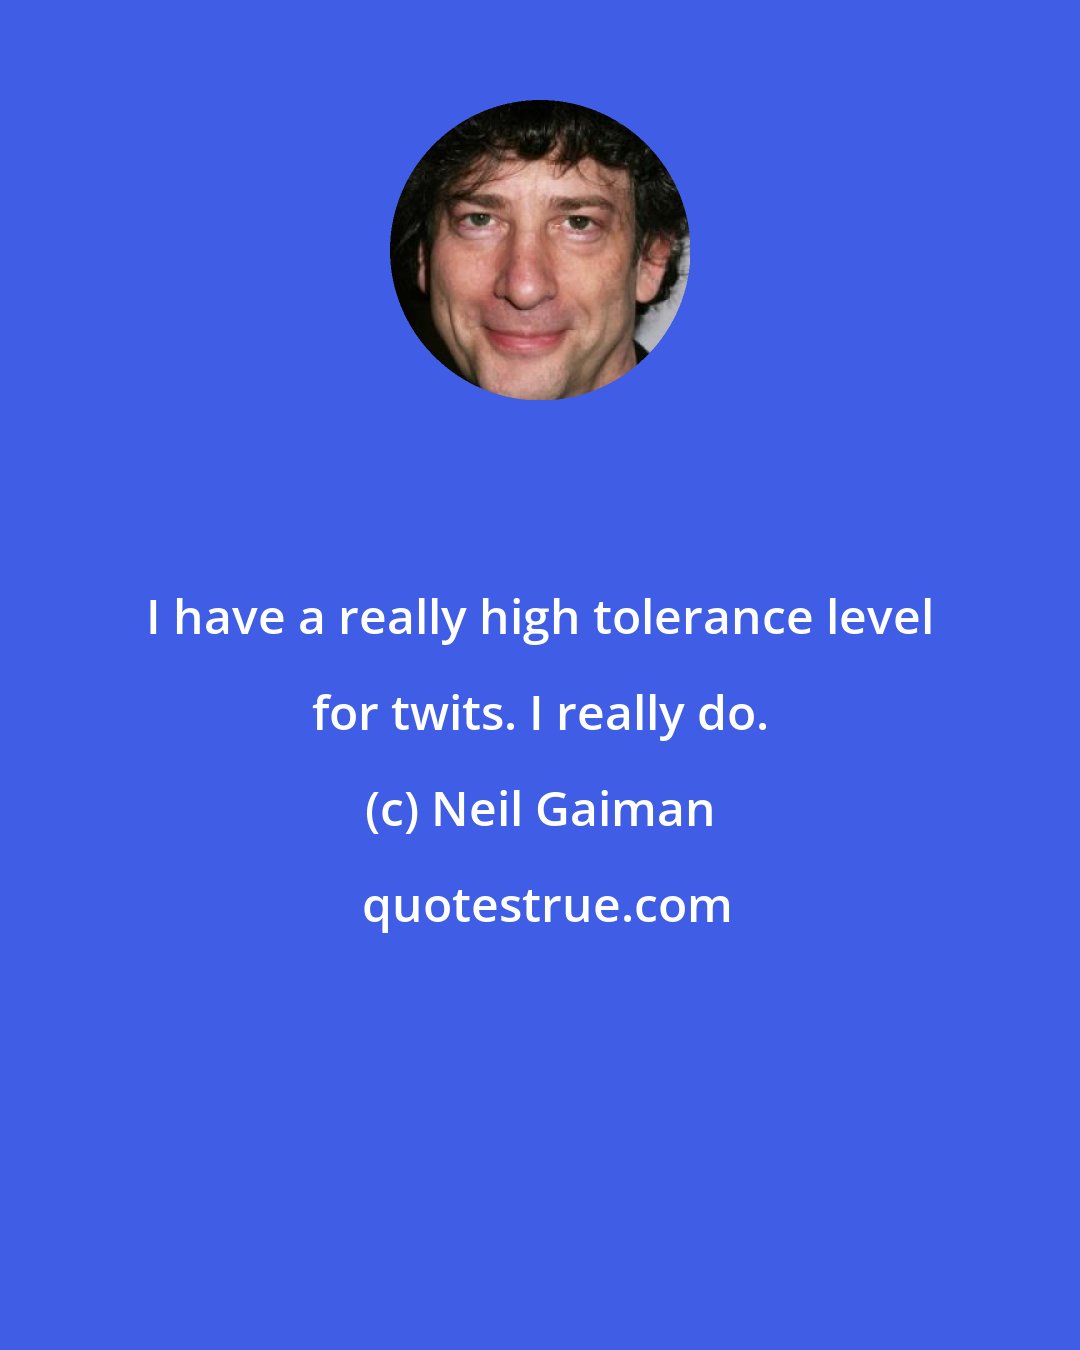 Neil Gaiman: I have a really high tolerance level for twits. I really do.